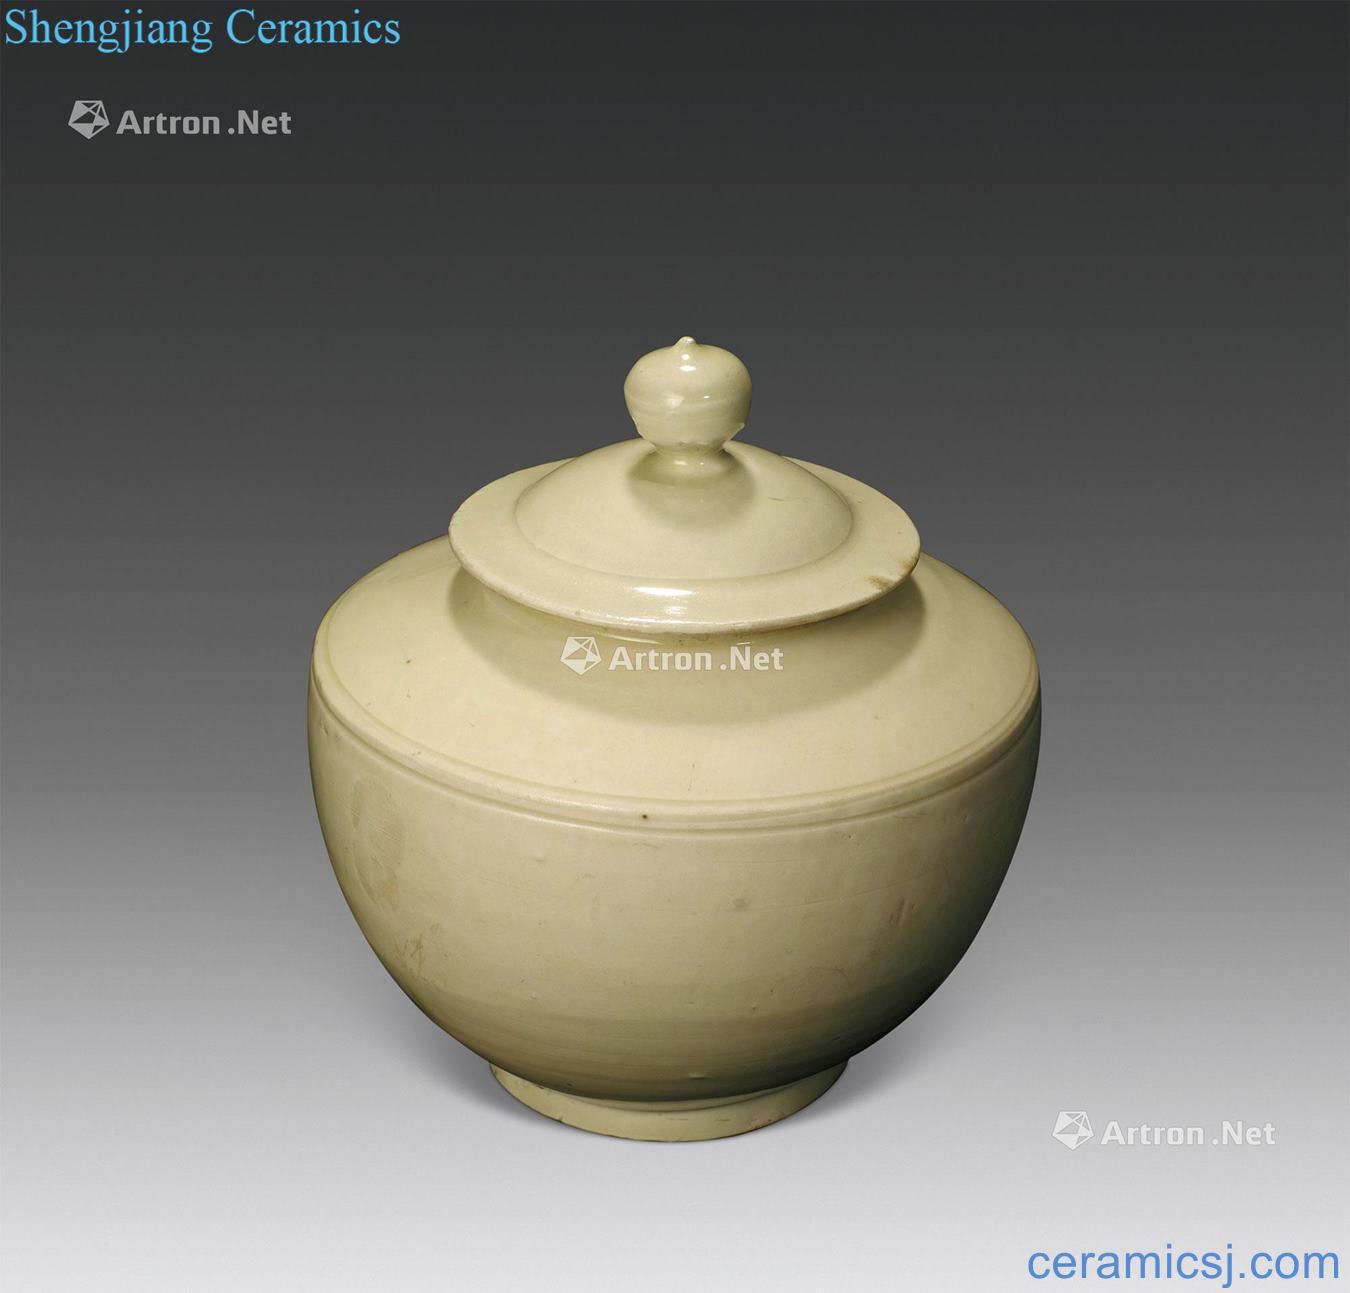 The song kiln cover pot